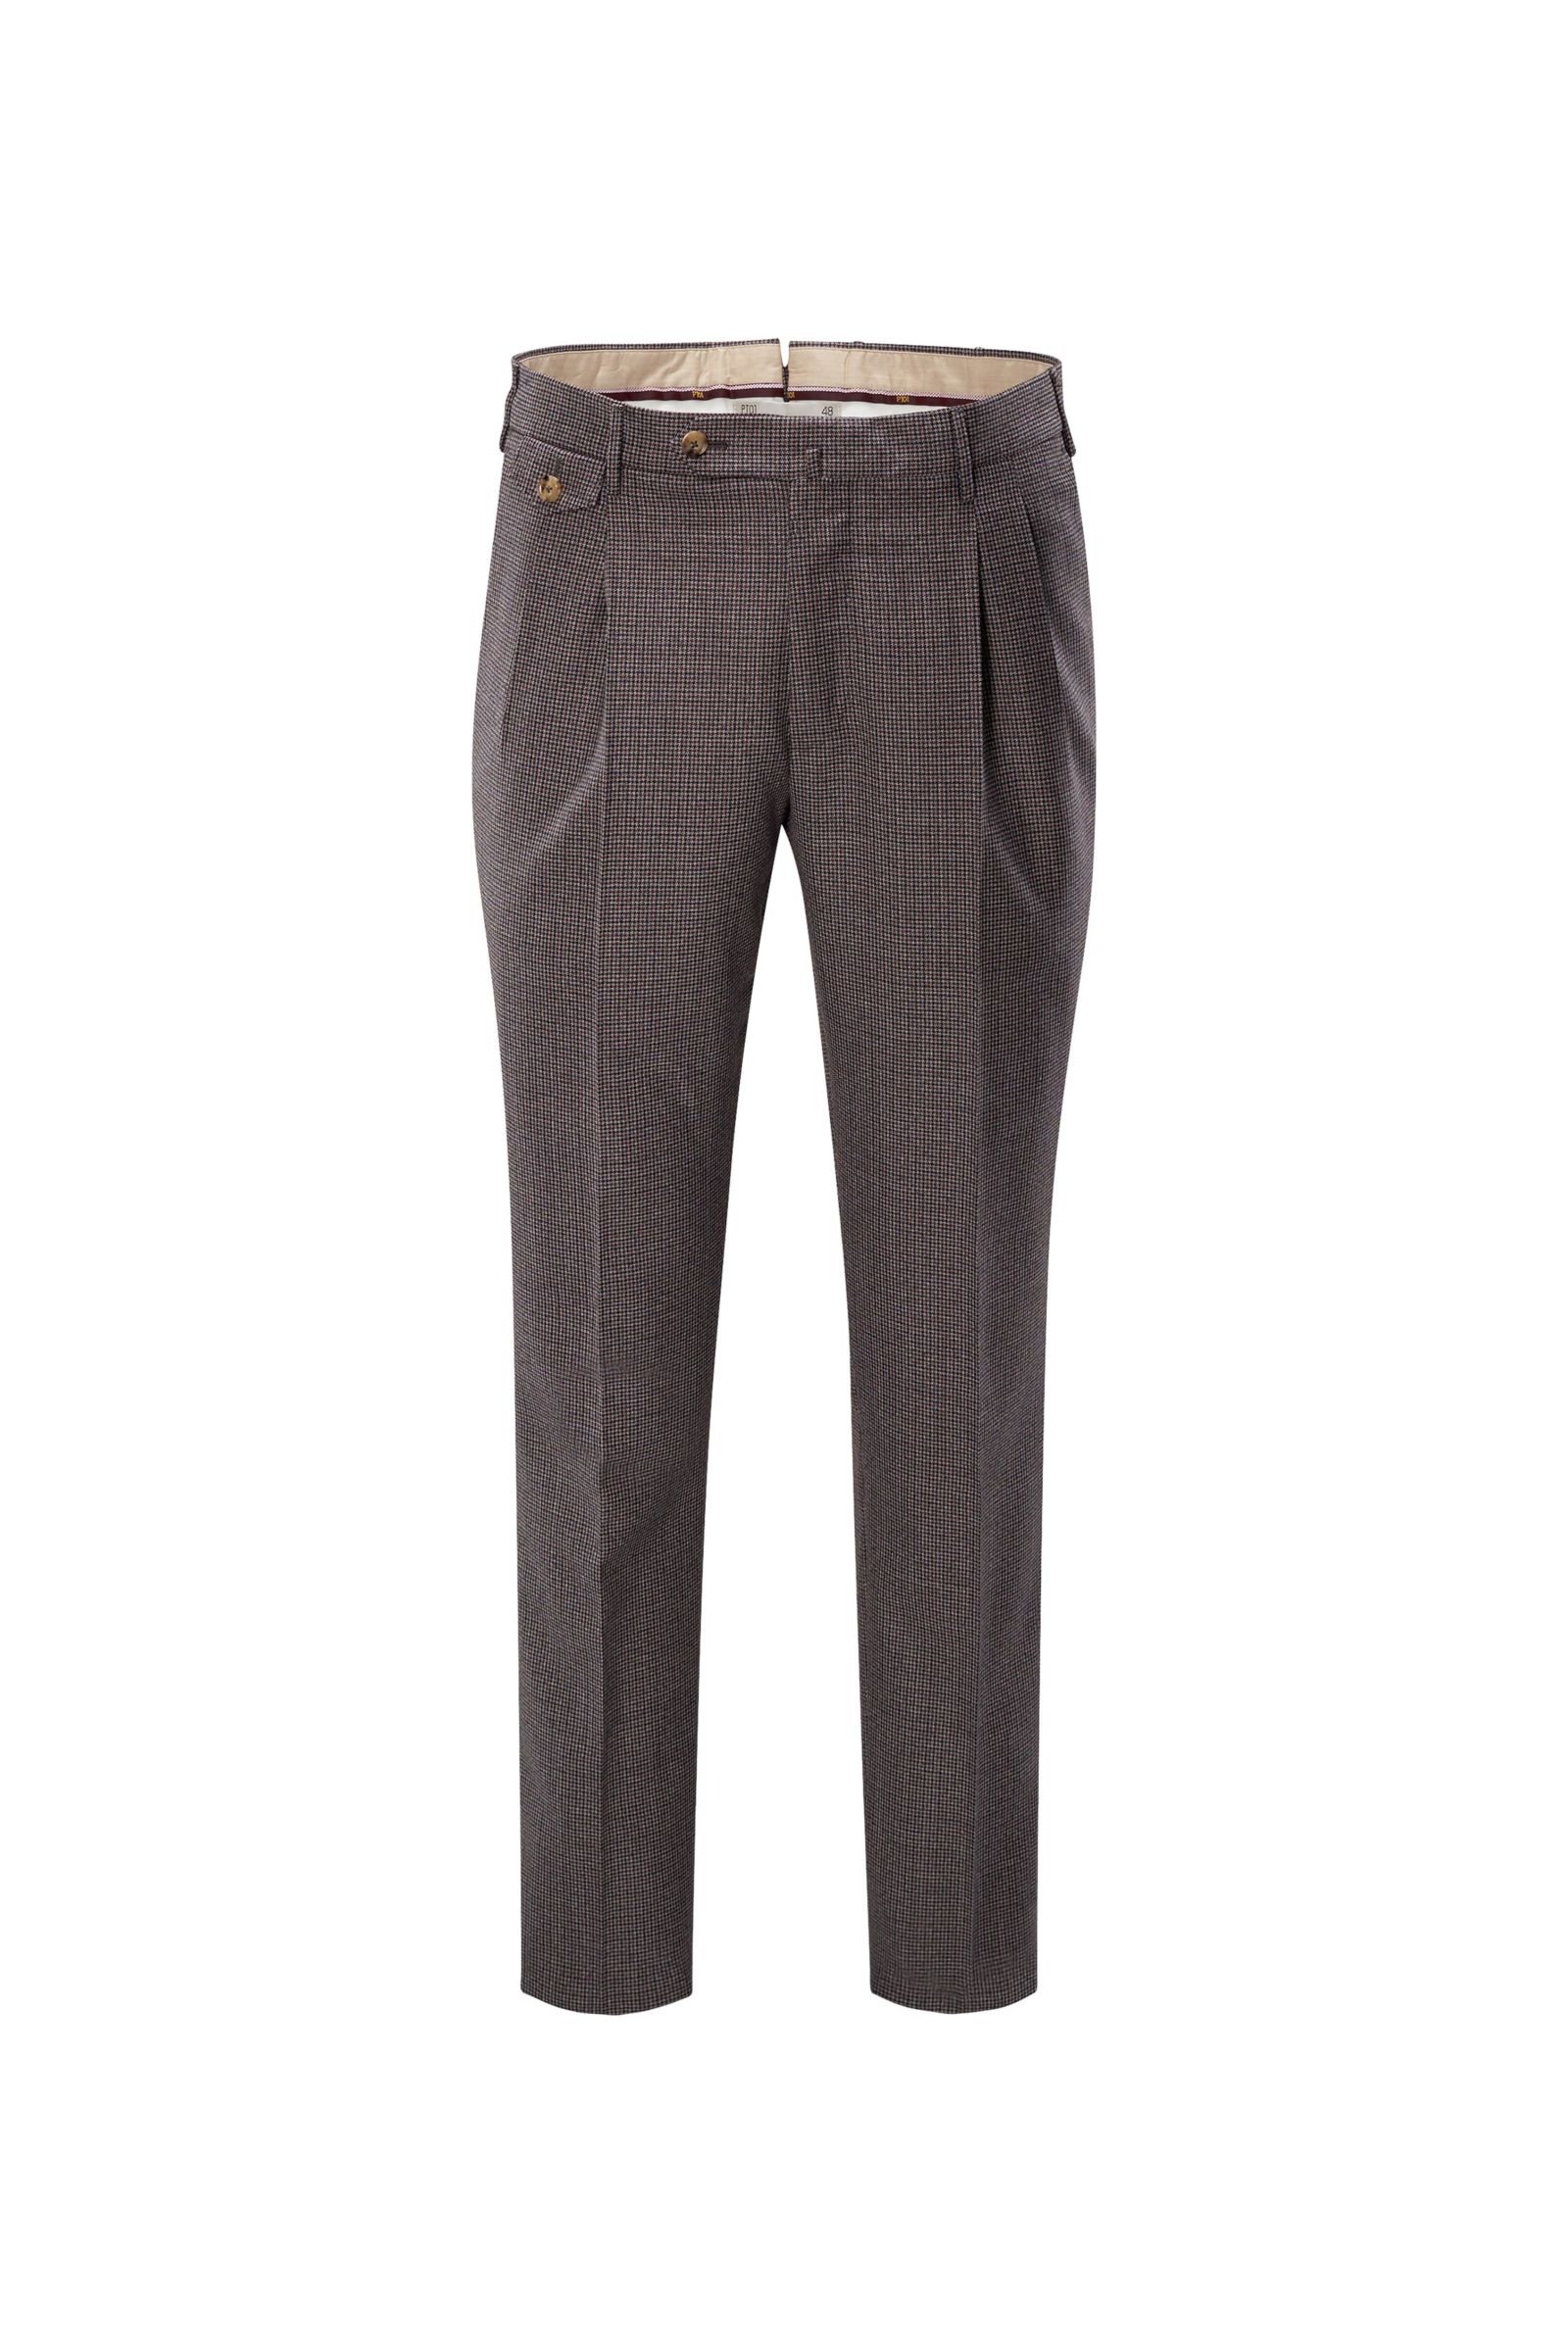 Wool trousers 'The Draper Gentleman Fit' grey/dark red checked